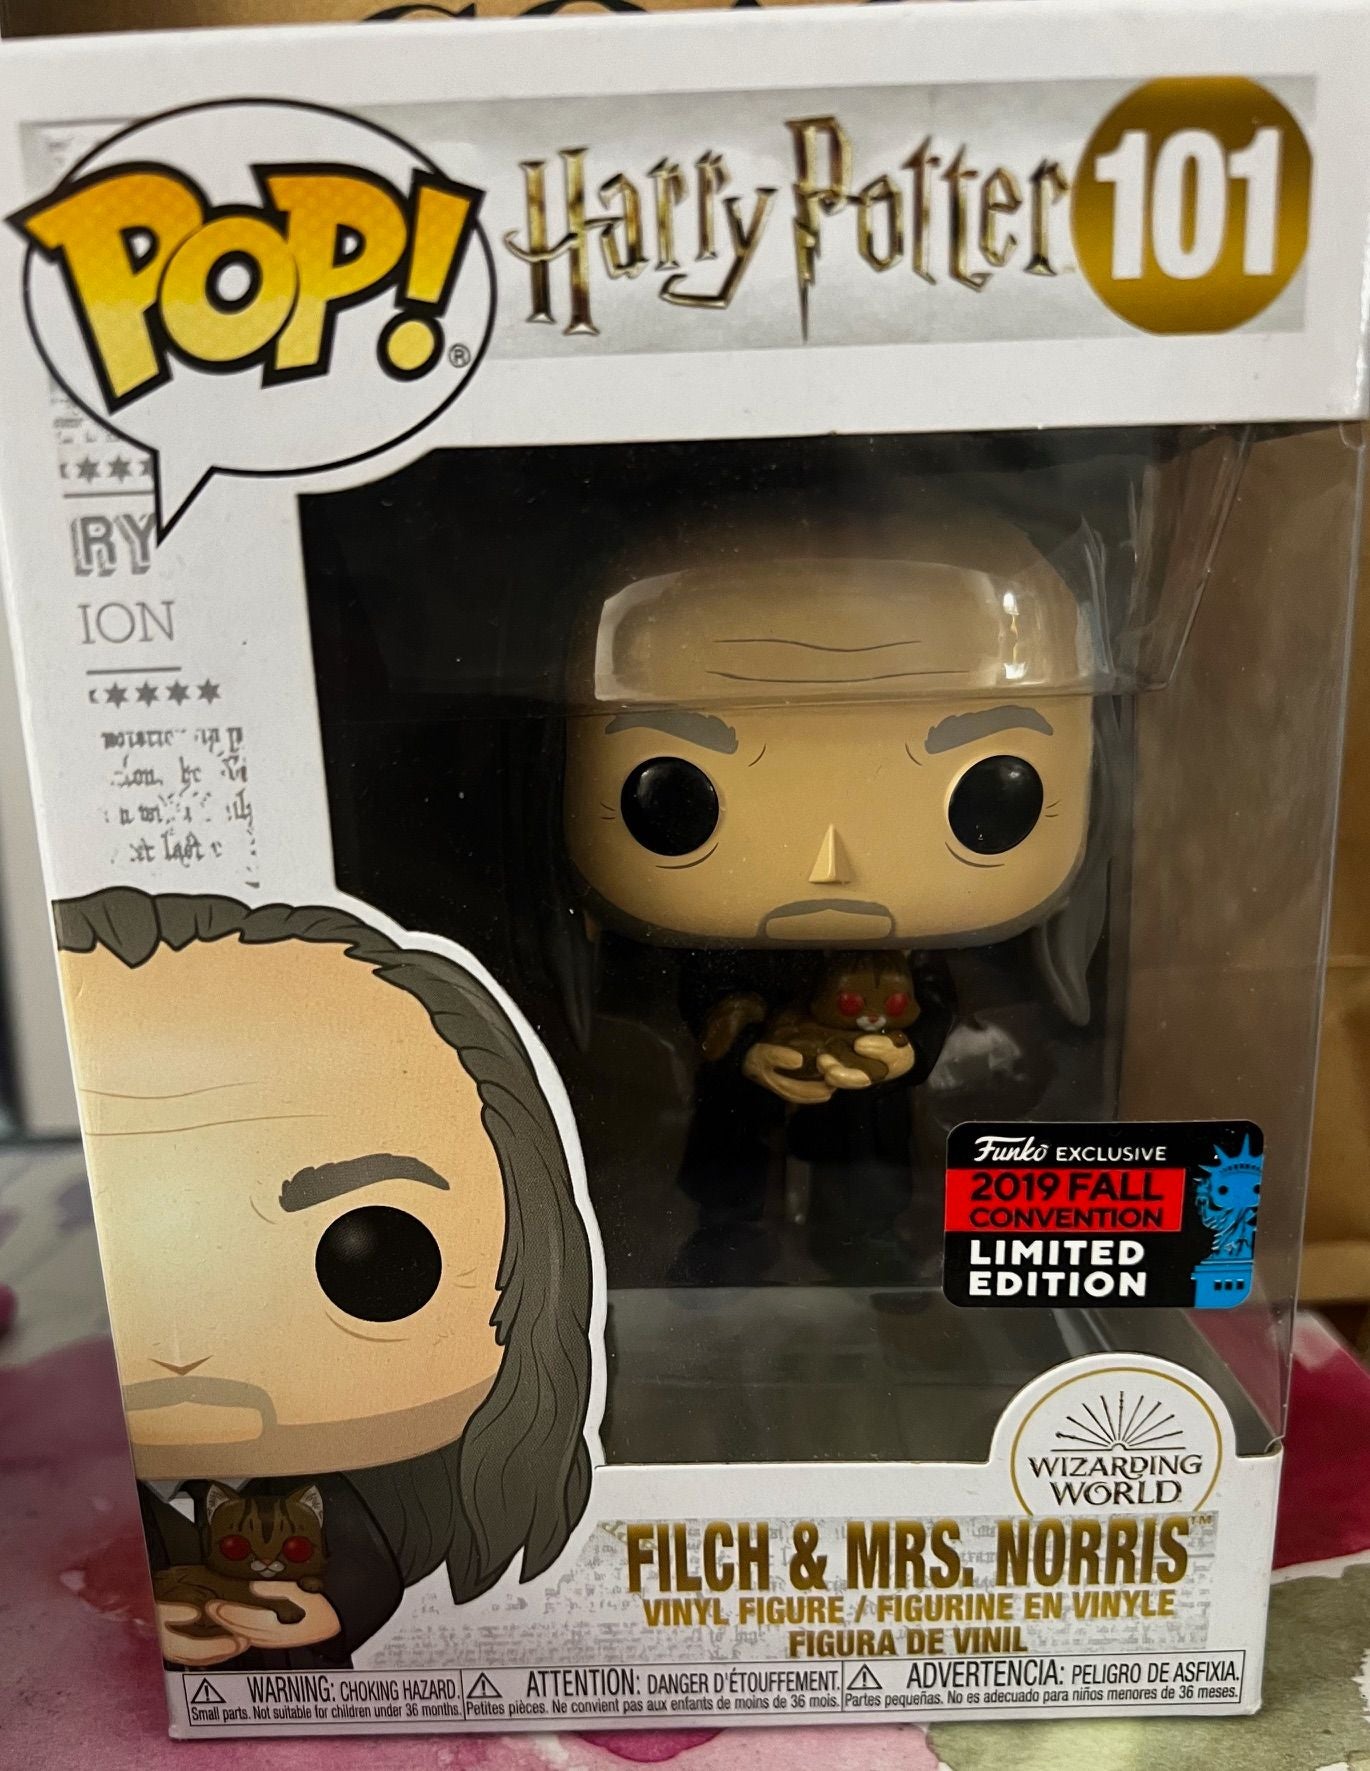 #101 - Filch & Mrs. Norris (2019 Fall Convention Limited Edition) - Harry Potter - 1